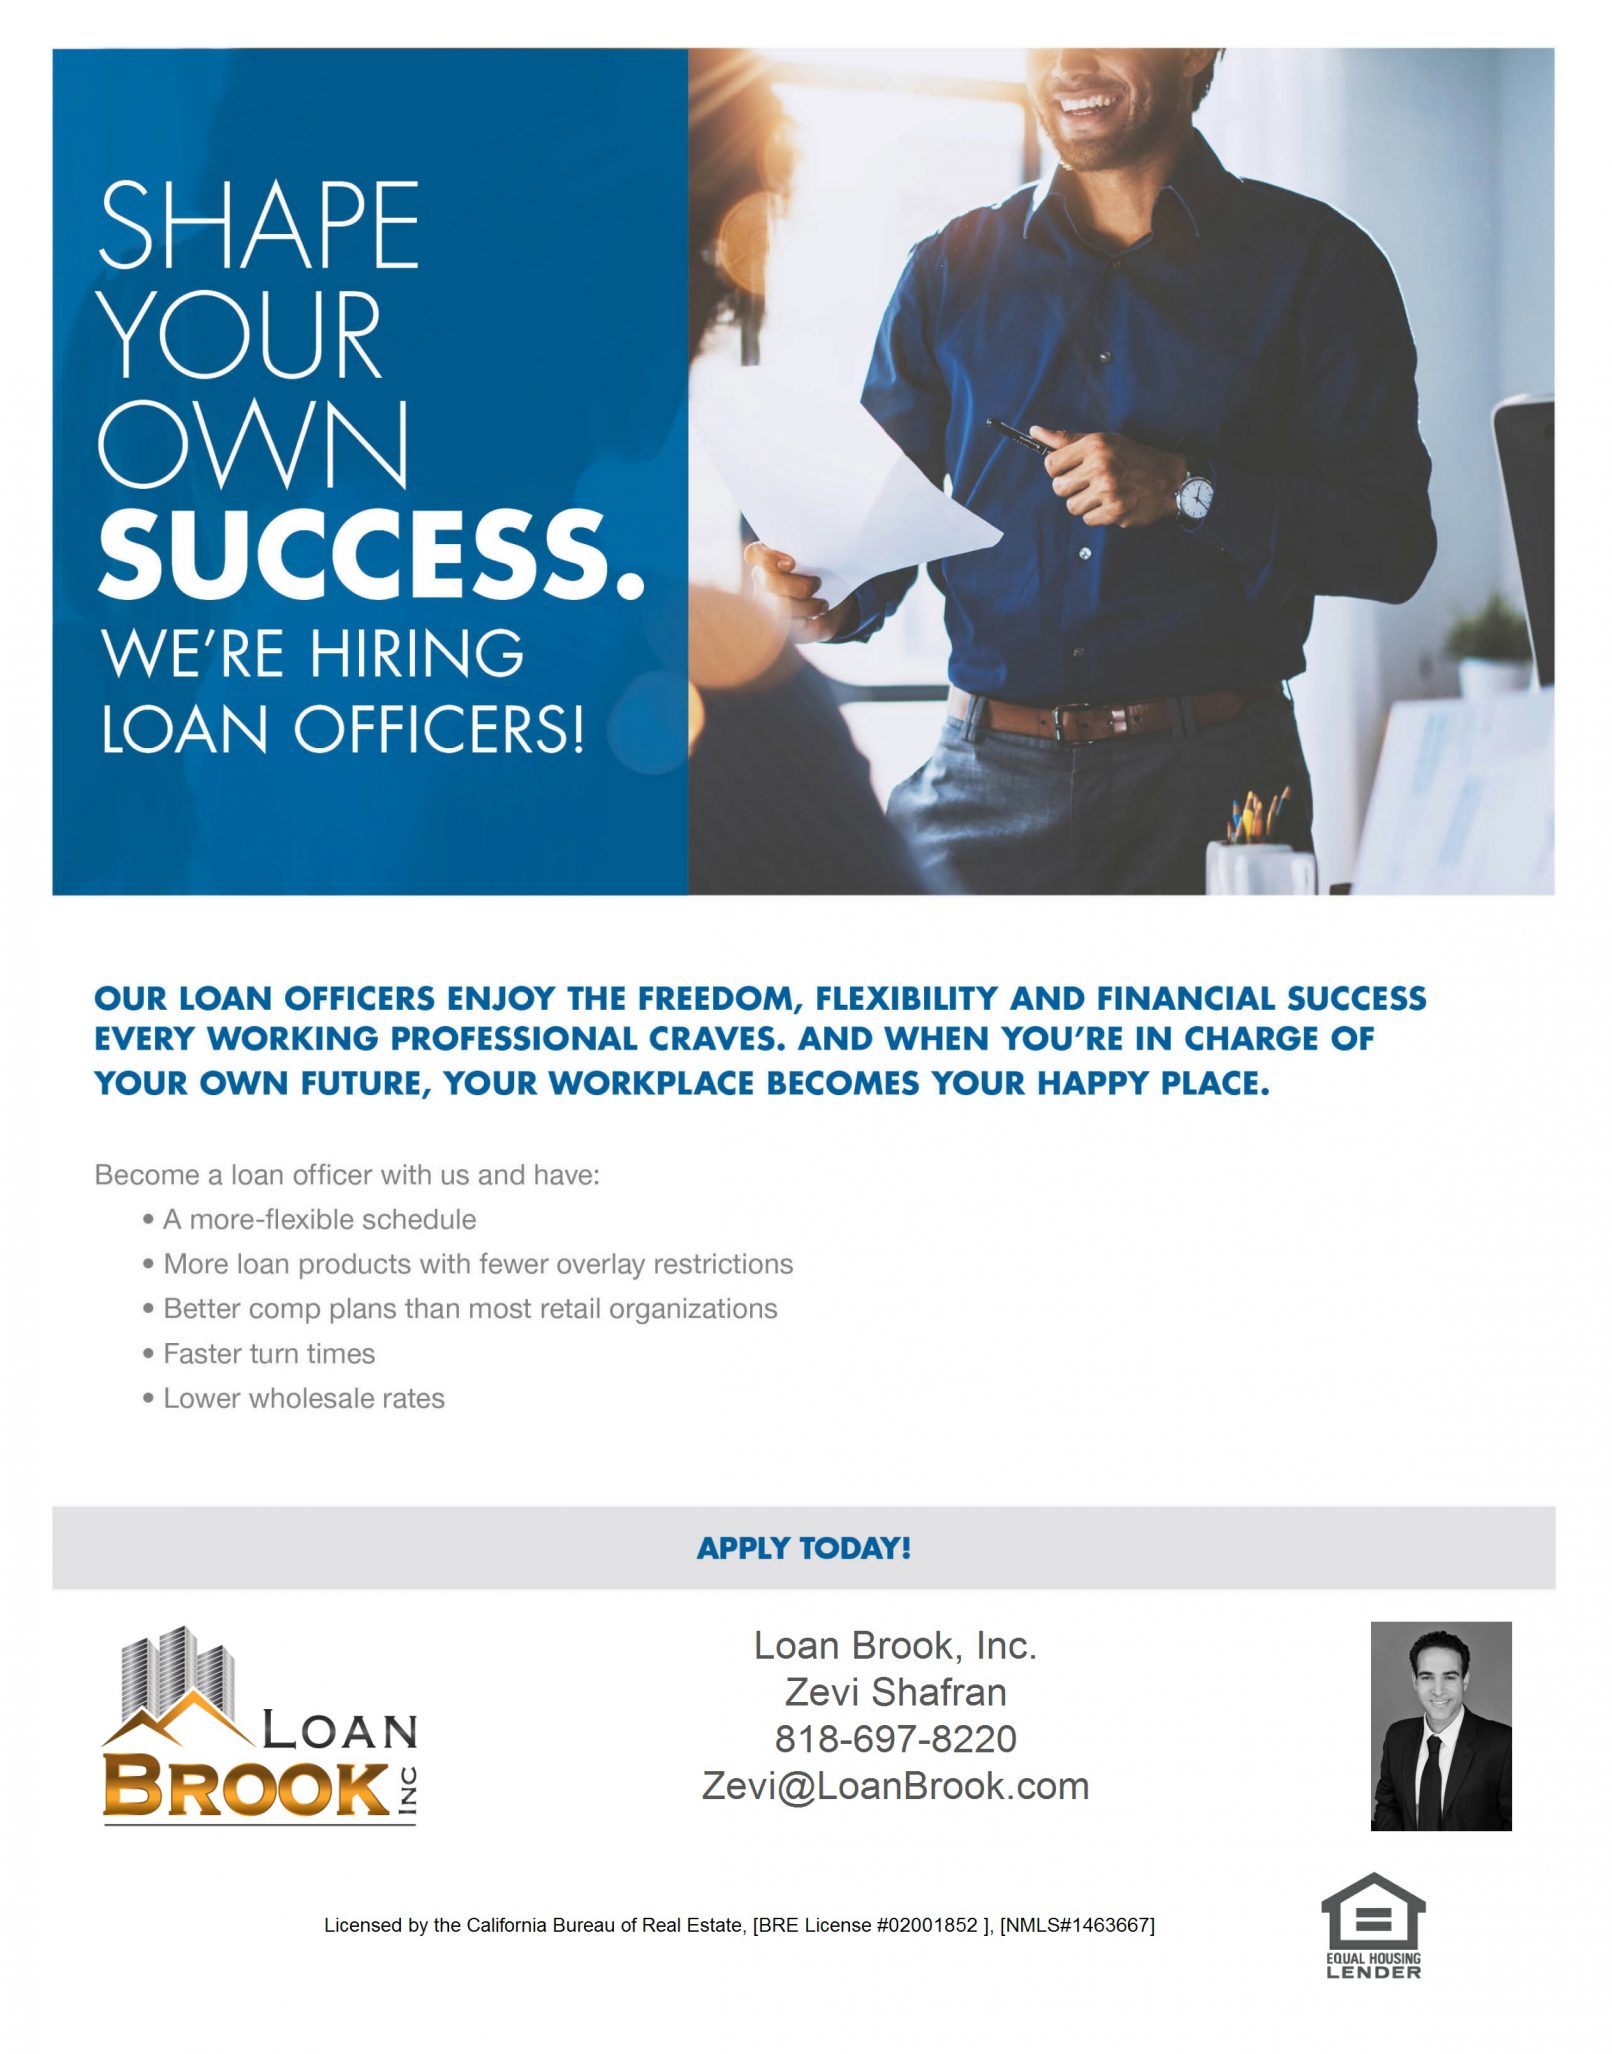 Shape Your Own Success In 2019! We Are Hiring Loan Officers! Loan